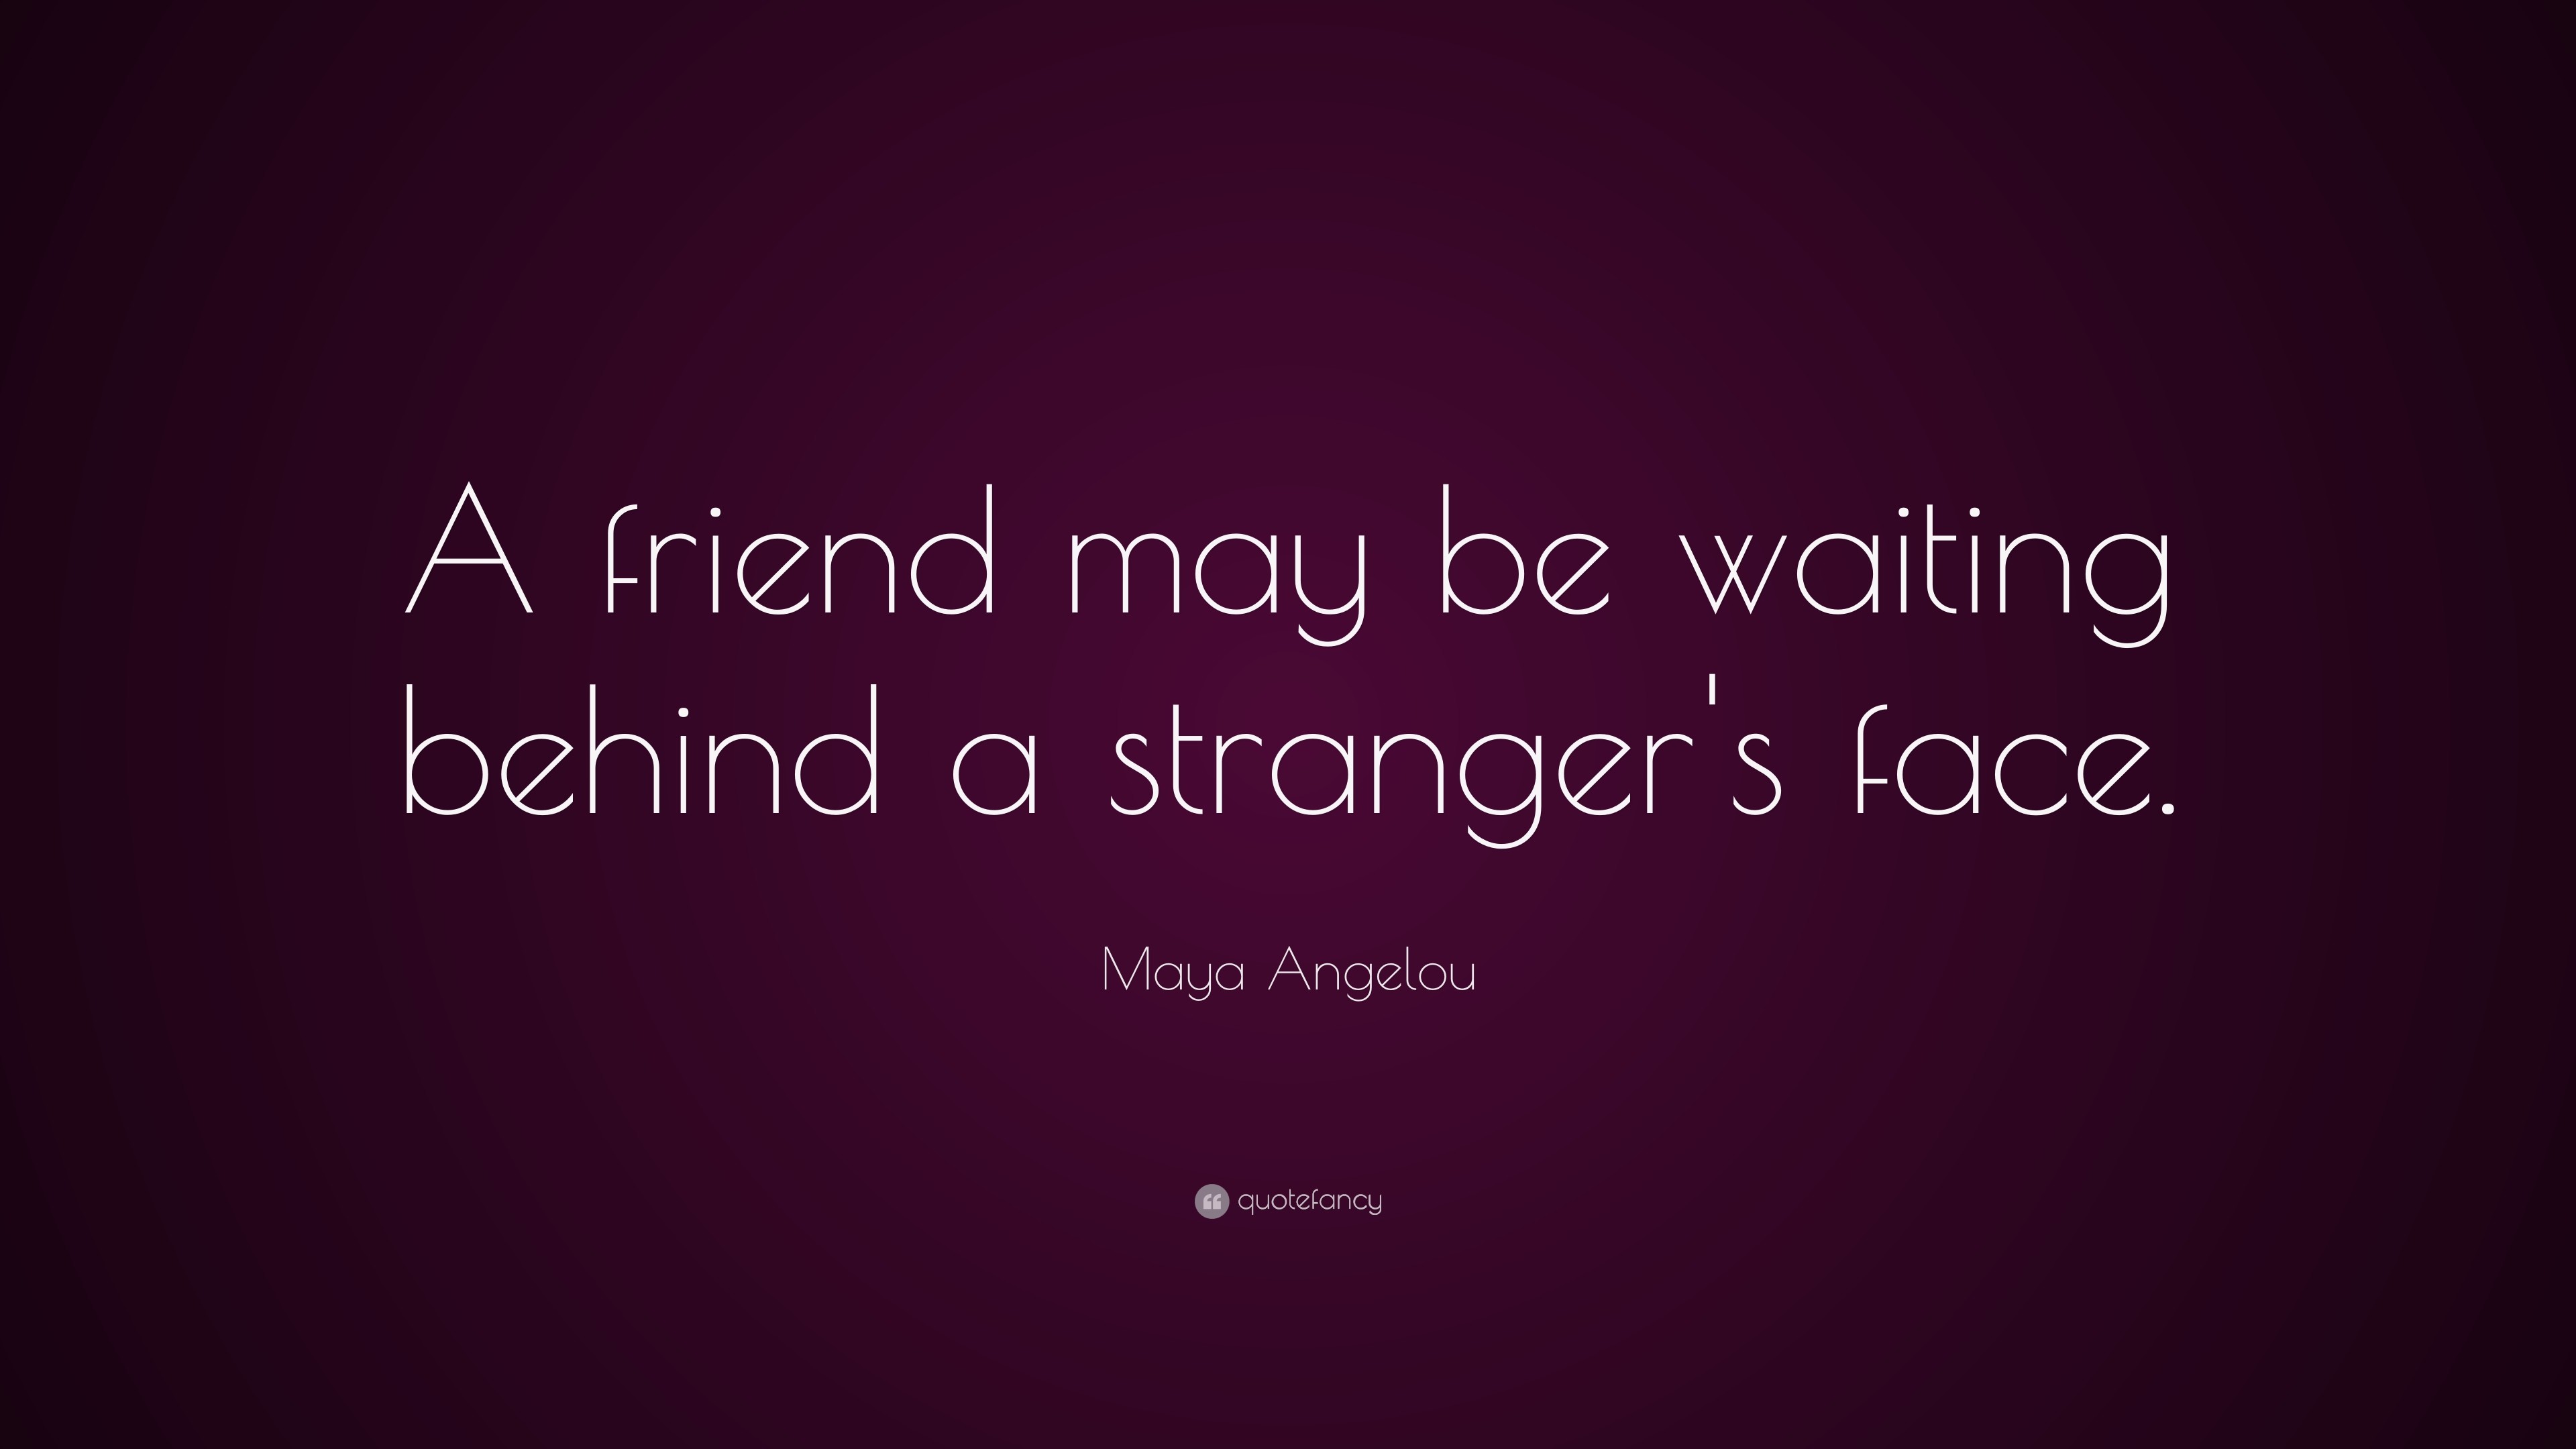 Your friend is waiting for you. Maya Angelou quote. Май френд. Quotes. May be waiting.